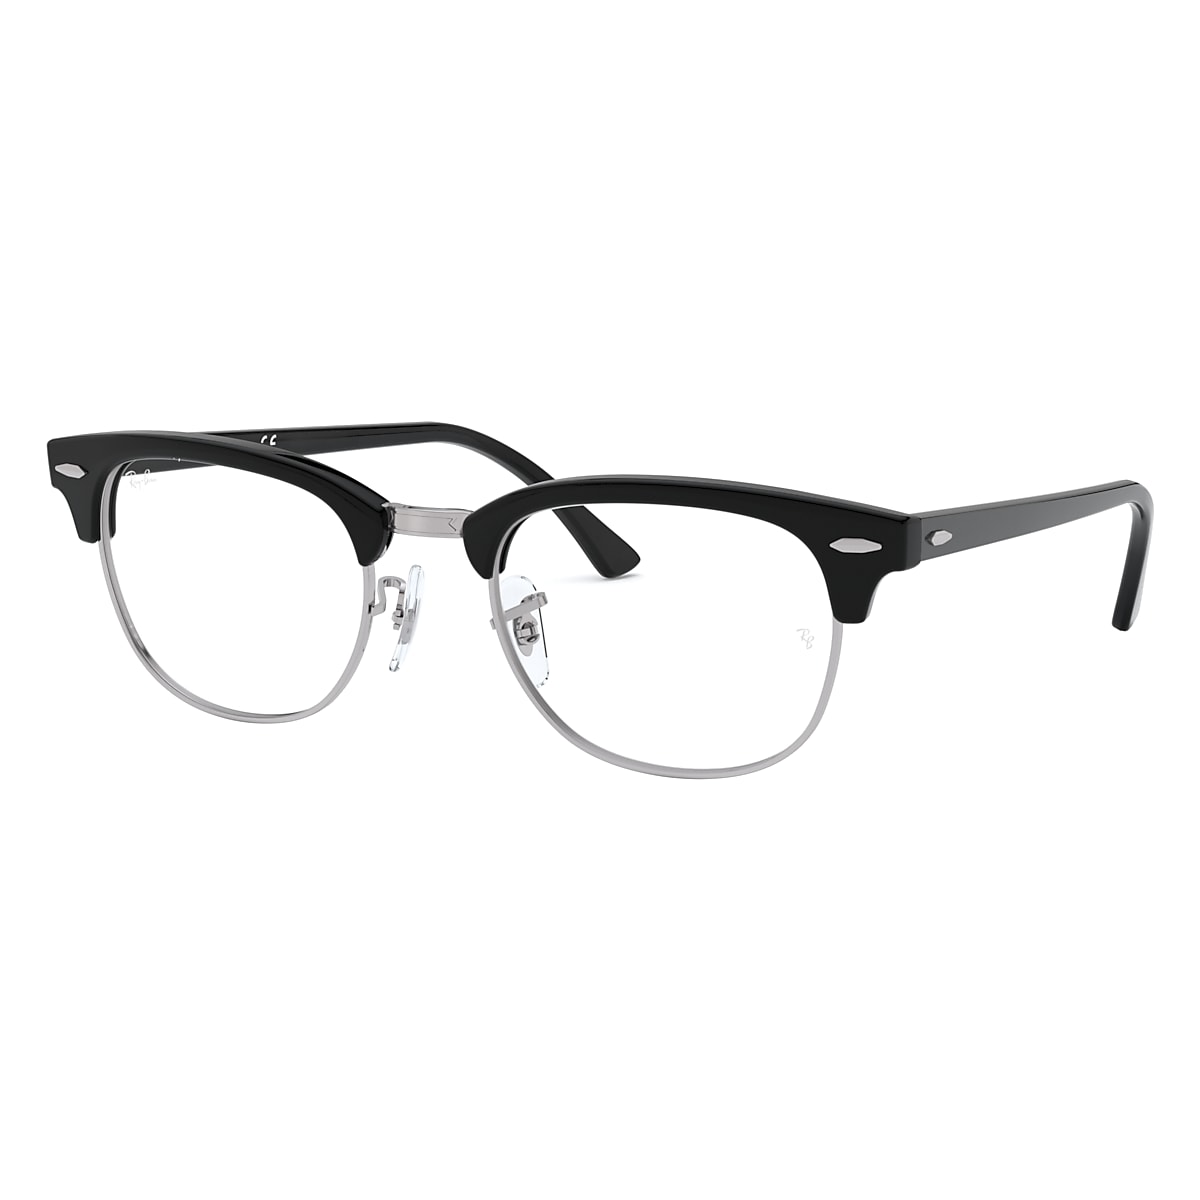 CLUBMASTER OPTICS Eyeglasses with Black On Silver Frame - RB5154 | Ray-Ban®  US